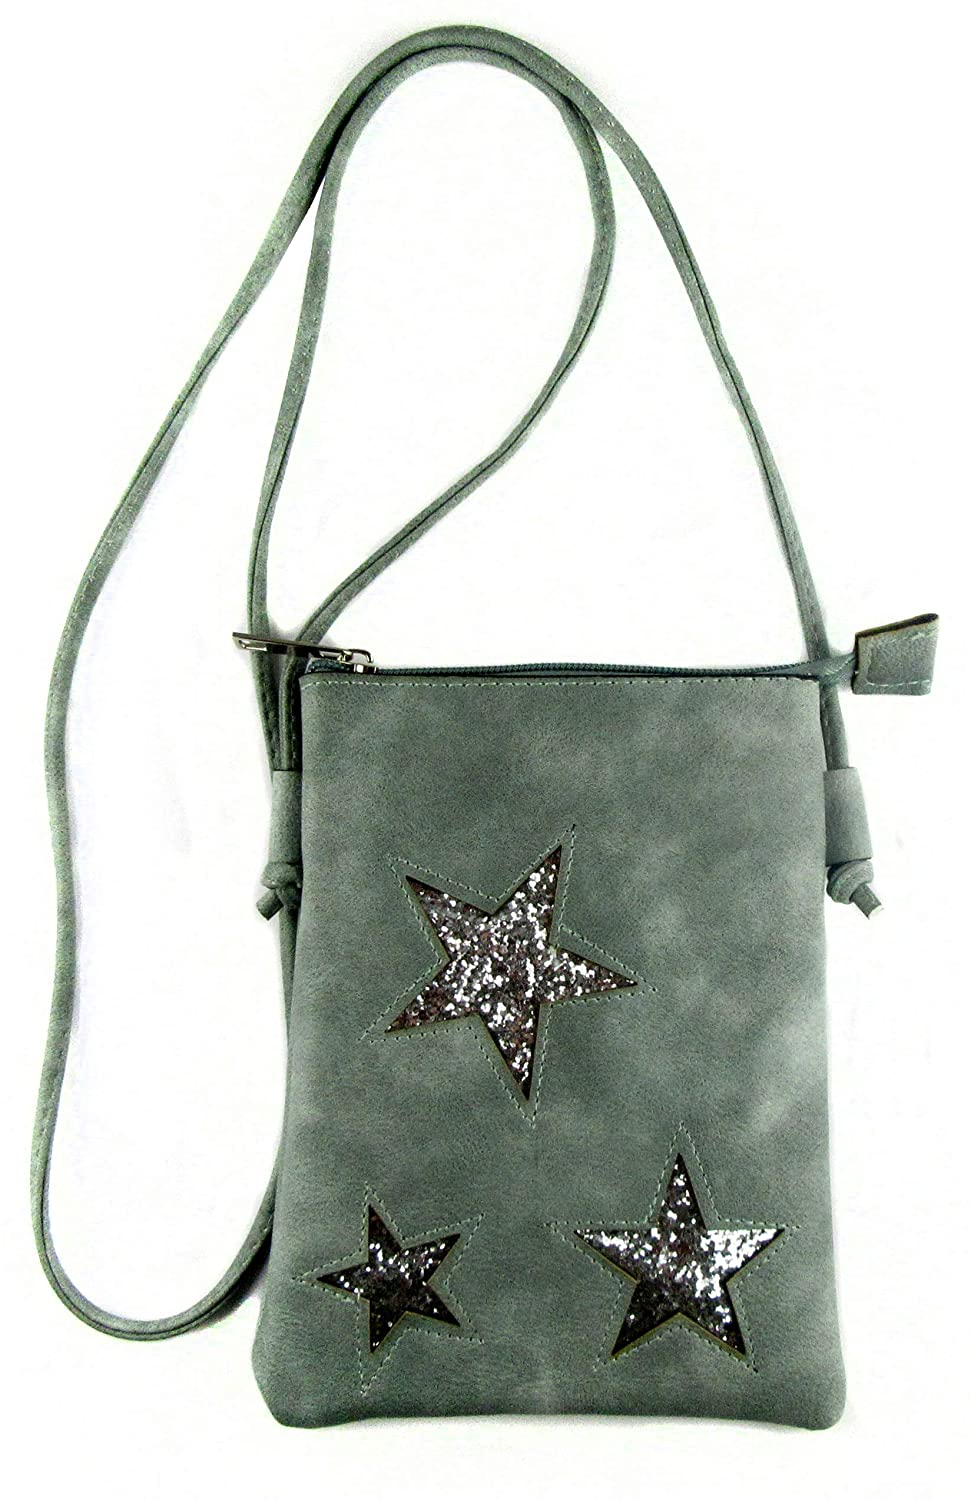 Small shoulder bag for women with silver stars. Cross-body bag made in ...